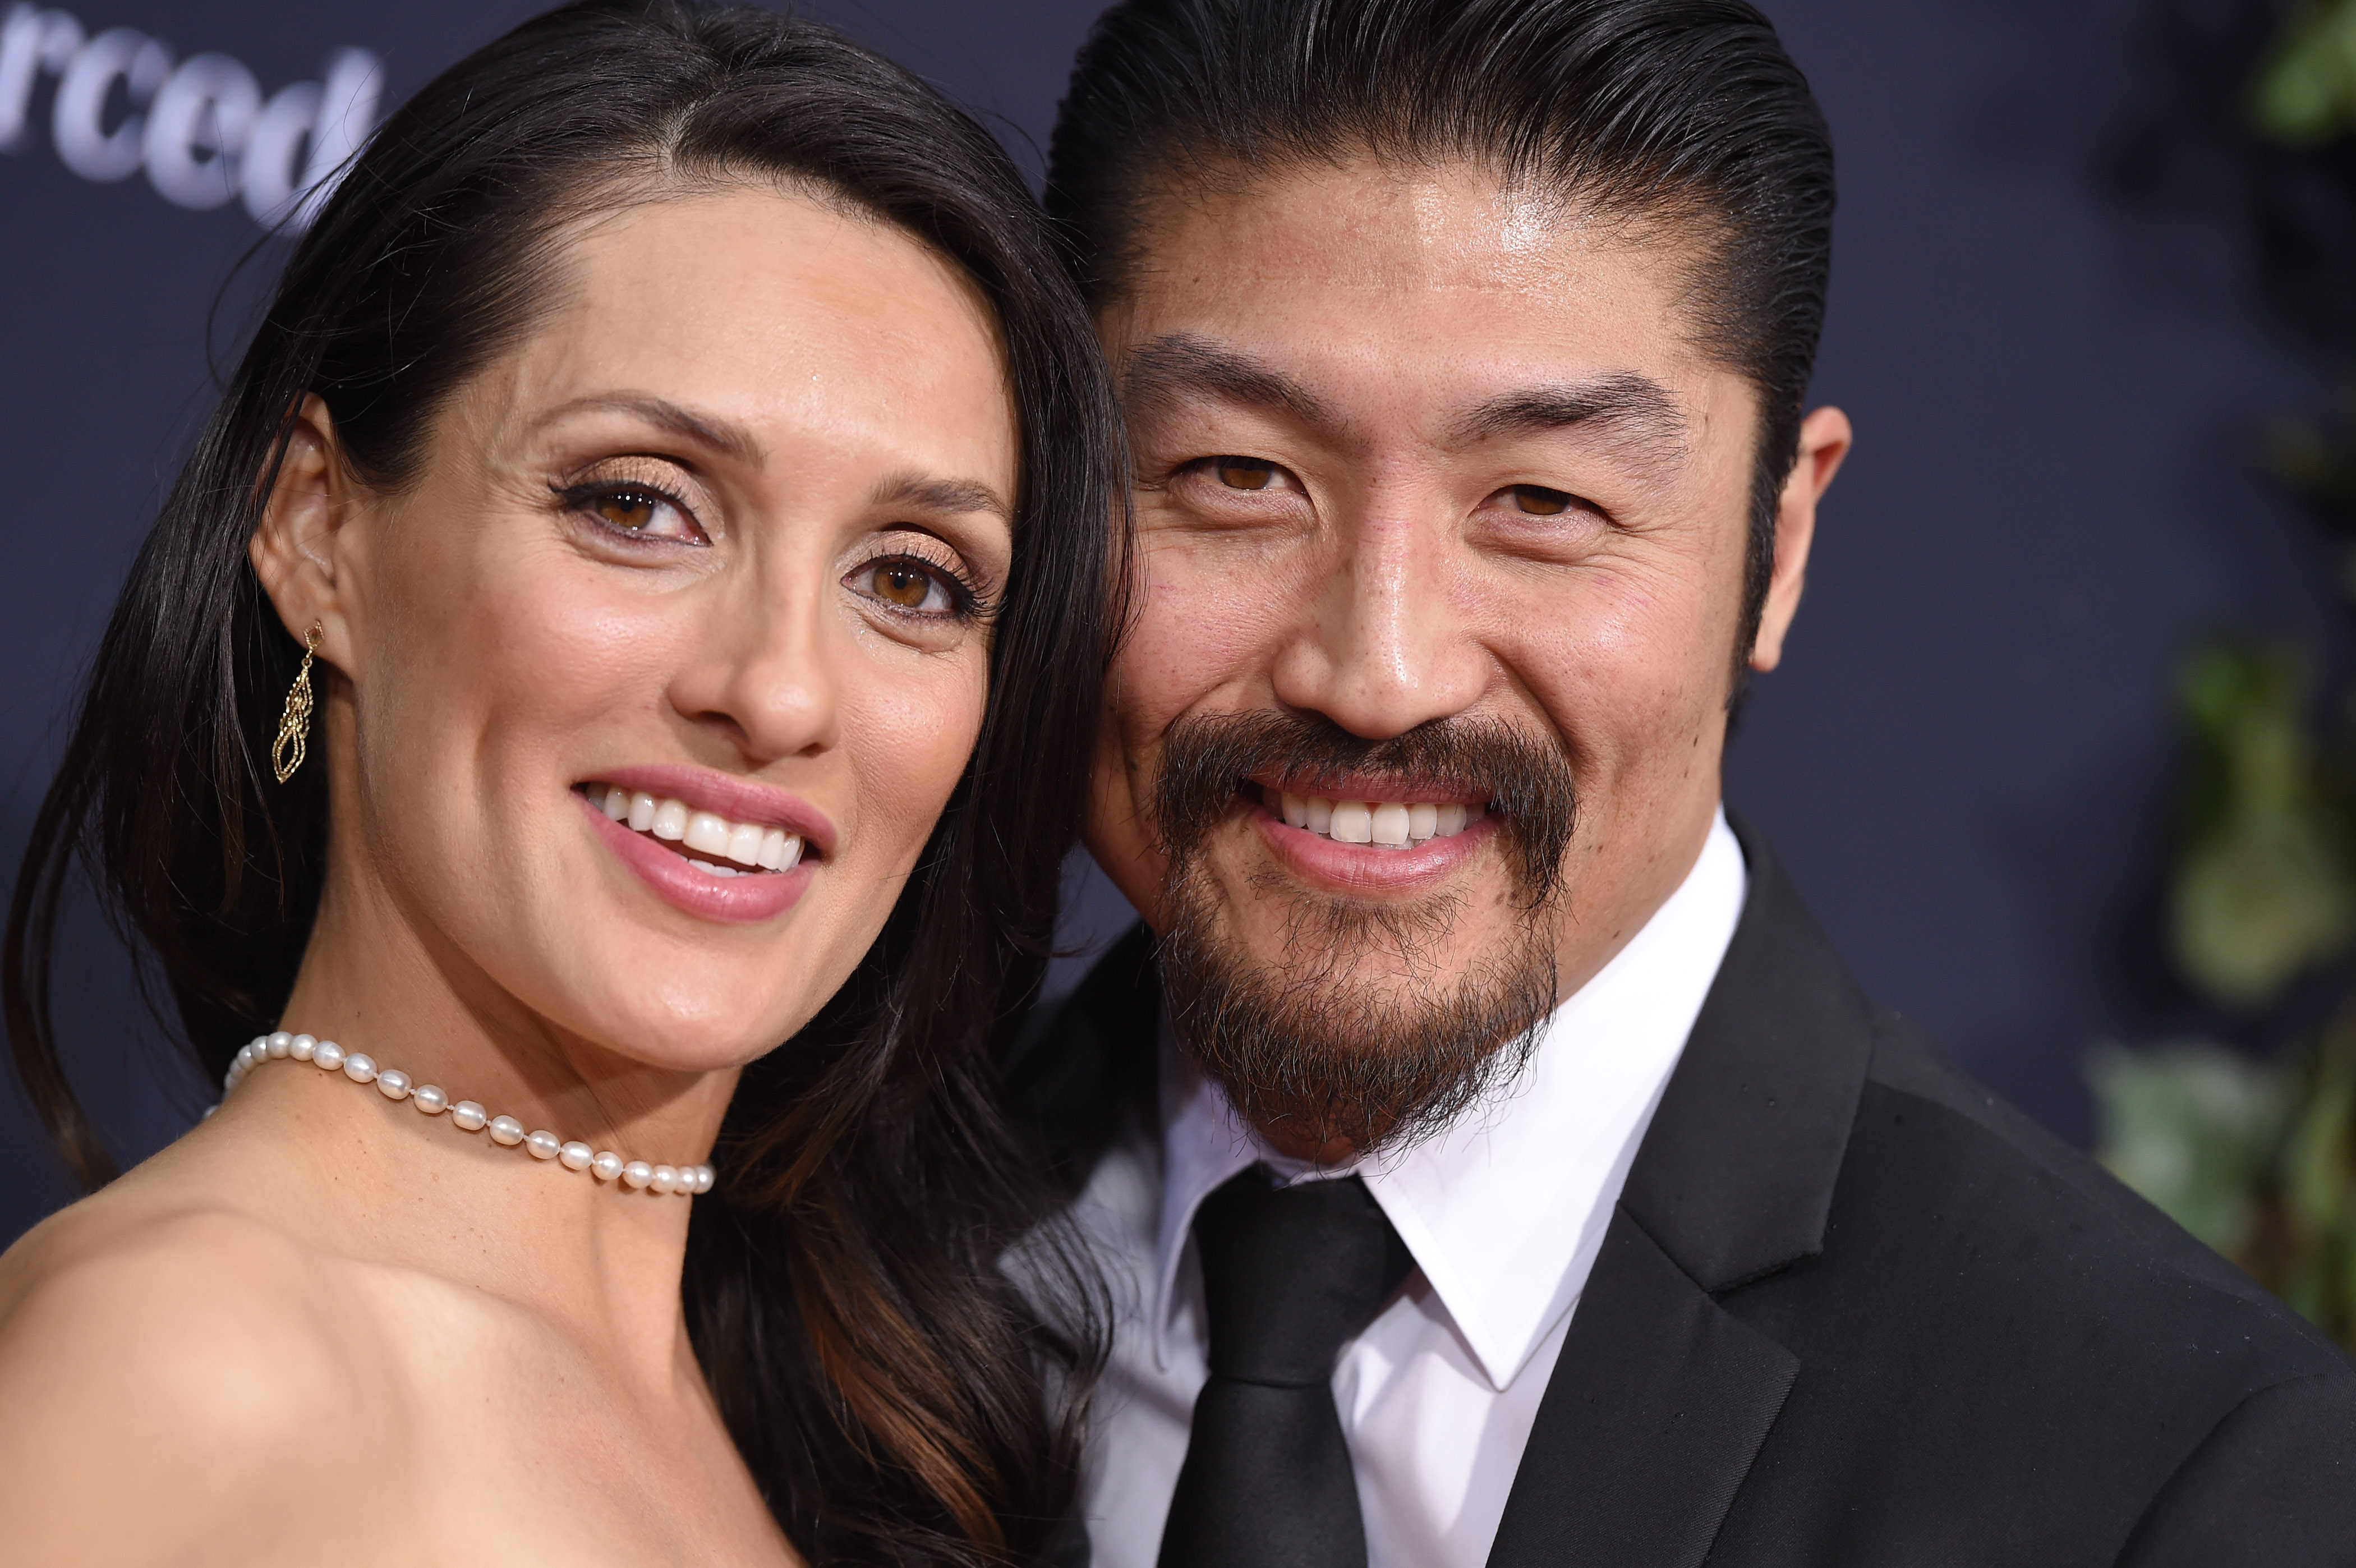 Brian Tee and Mirelly Taylor at the world premiere of 'Jurassic World' in 2015, in Hollywood. | Source: Getty Images